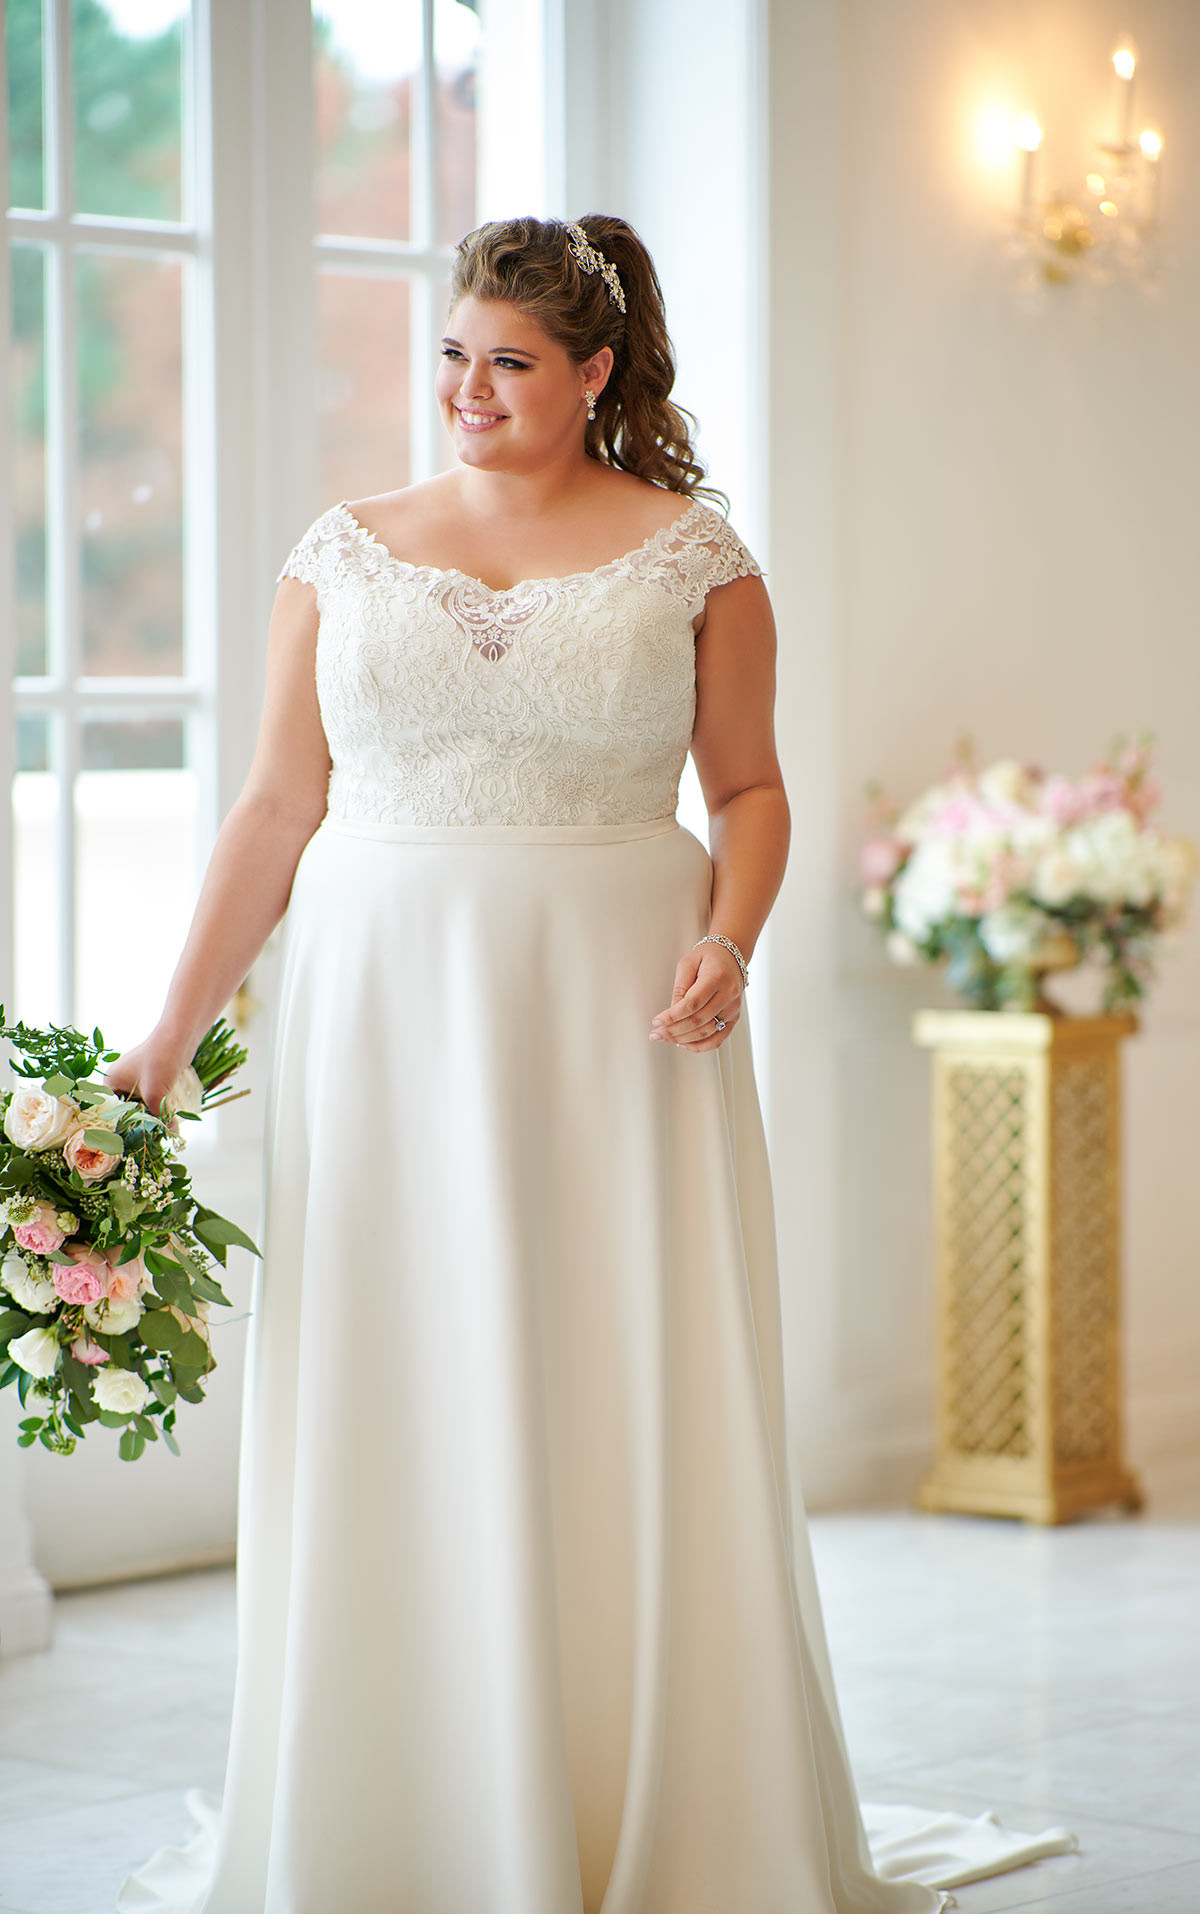 Plus Size Simple Wedding Dresses
 Plus Size Simple and Sweet Wedding Dress